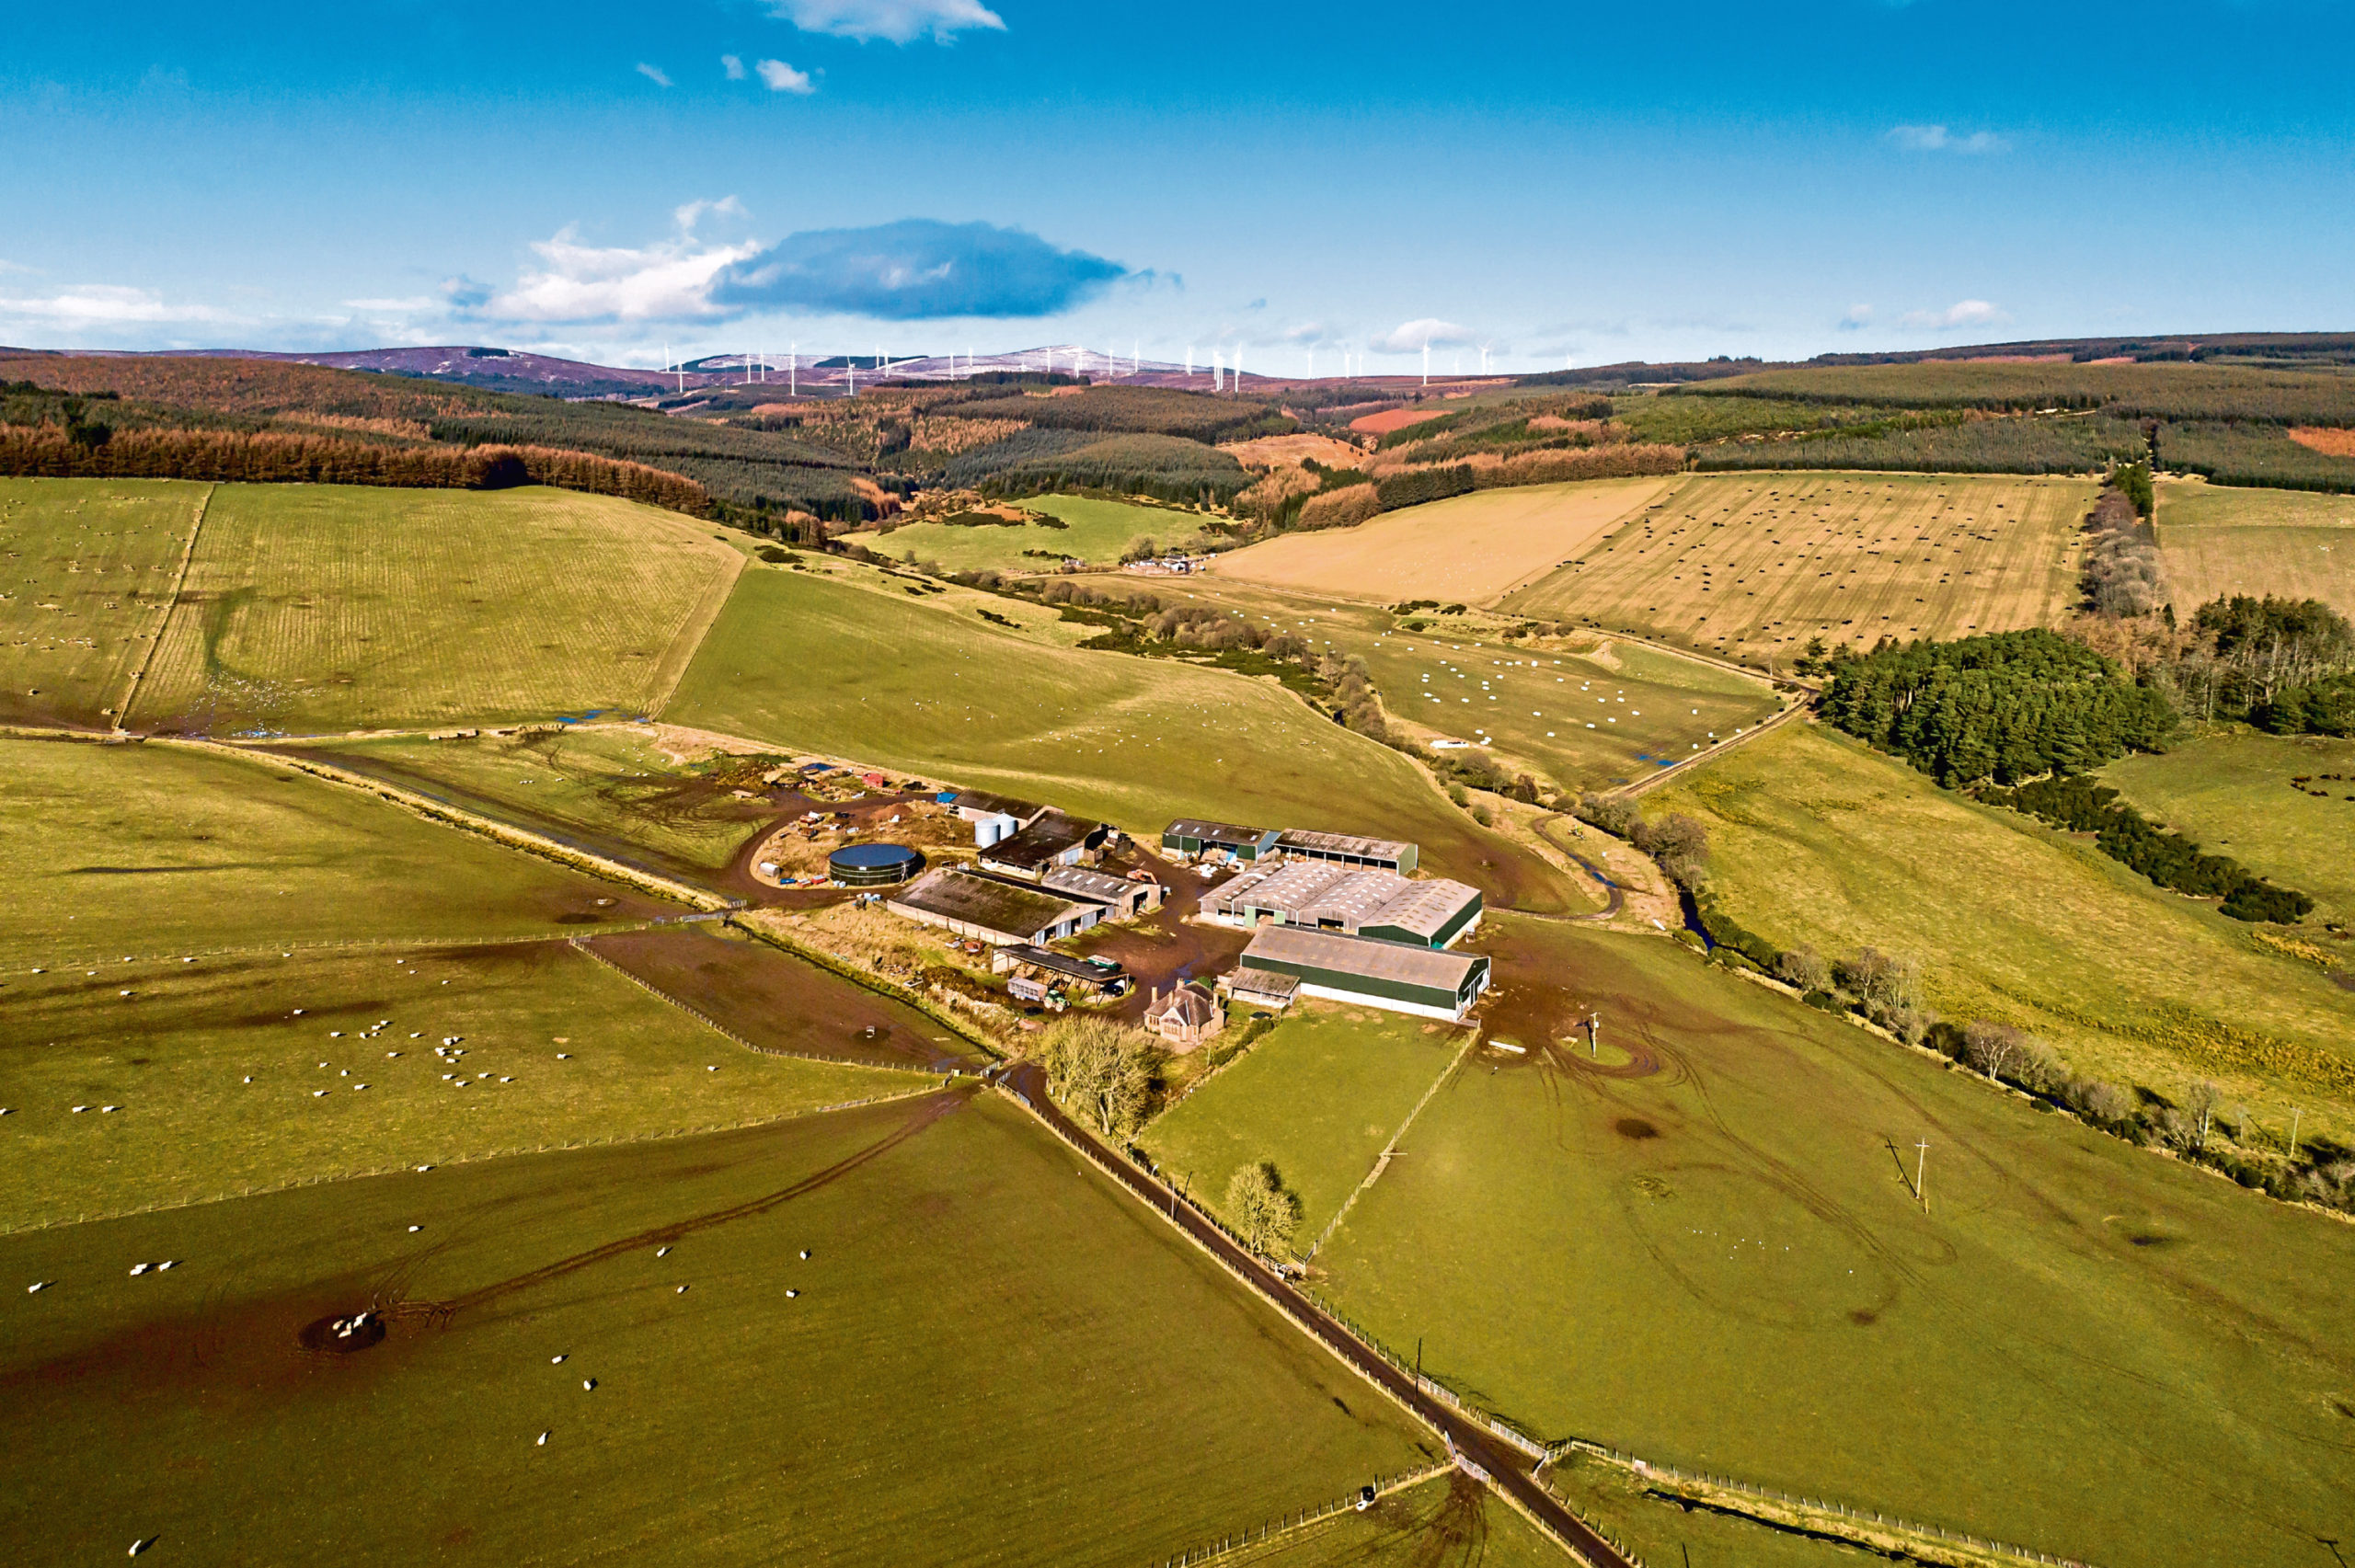 Tipperty Farm is currently being marketed by Galbraith for offers over £4.82m.